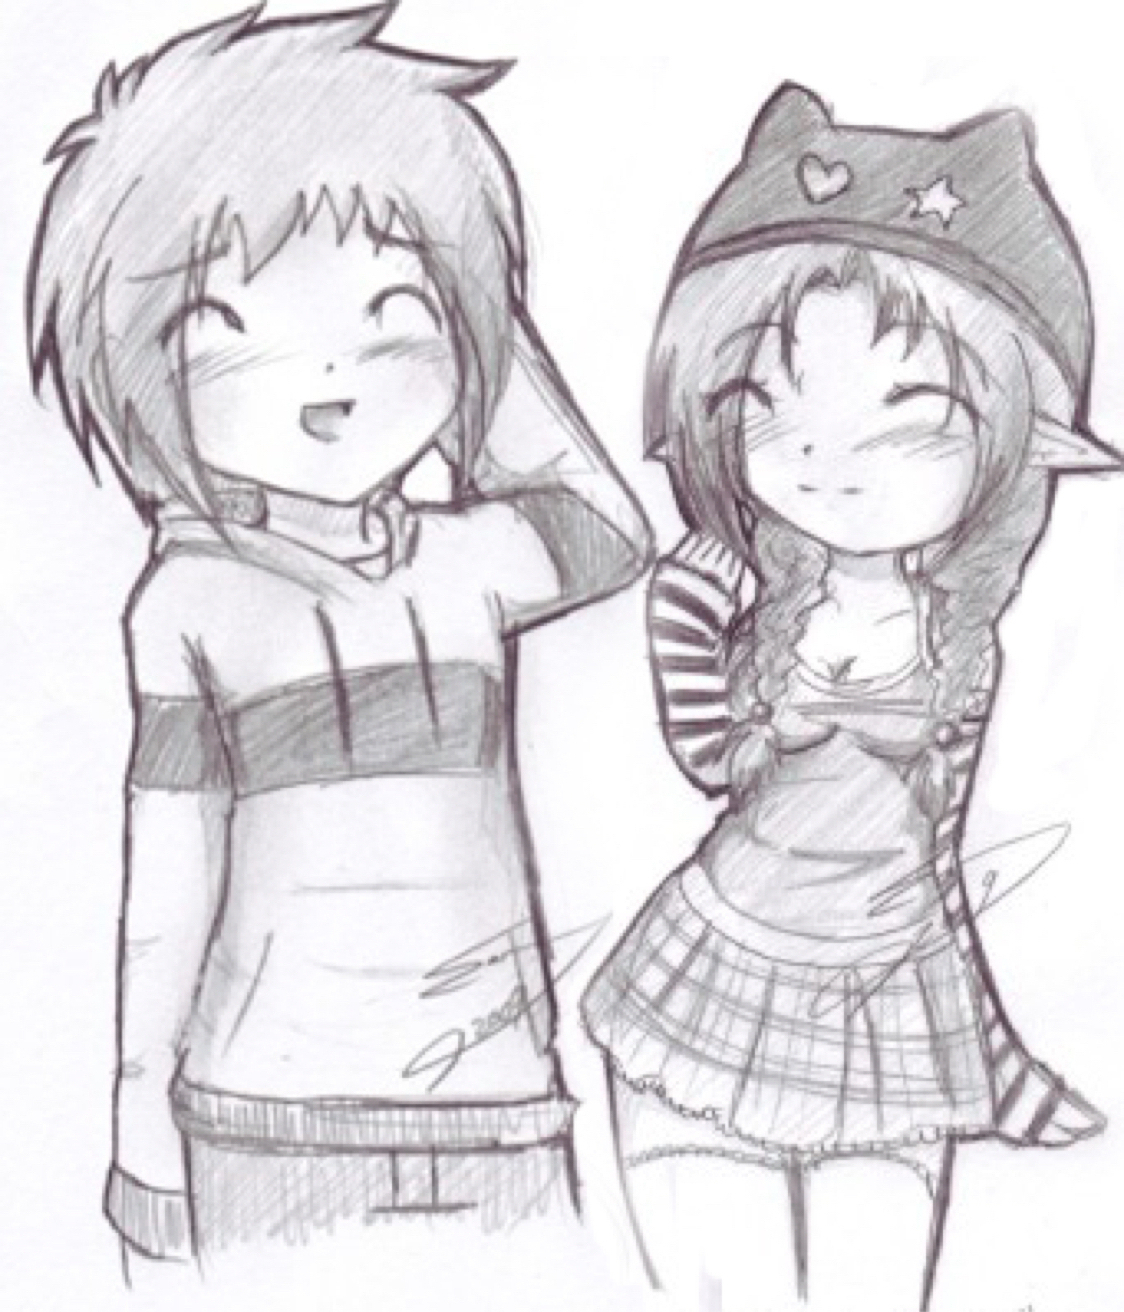 Pencil Sketch Of Boy And Girl Friendship Online Discount Shop For Electronics Apparel Toys Books Games Computers Shoes Jewelry Watches Baby Products Sports Outdoors Office Products Bed Bath Furniture